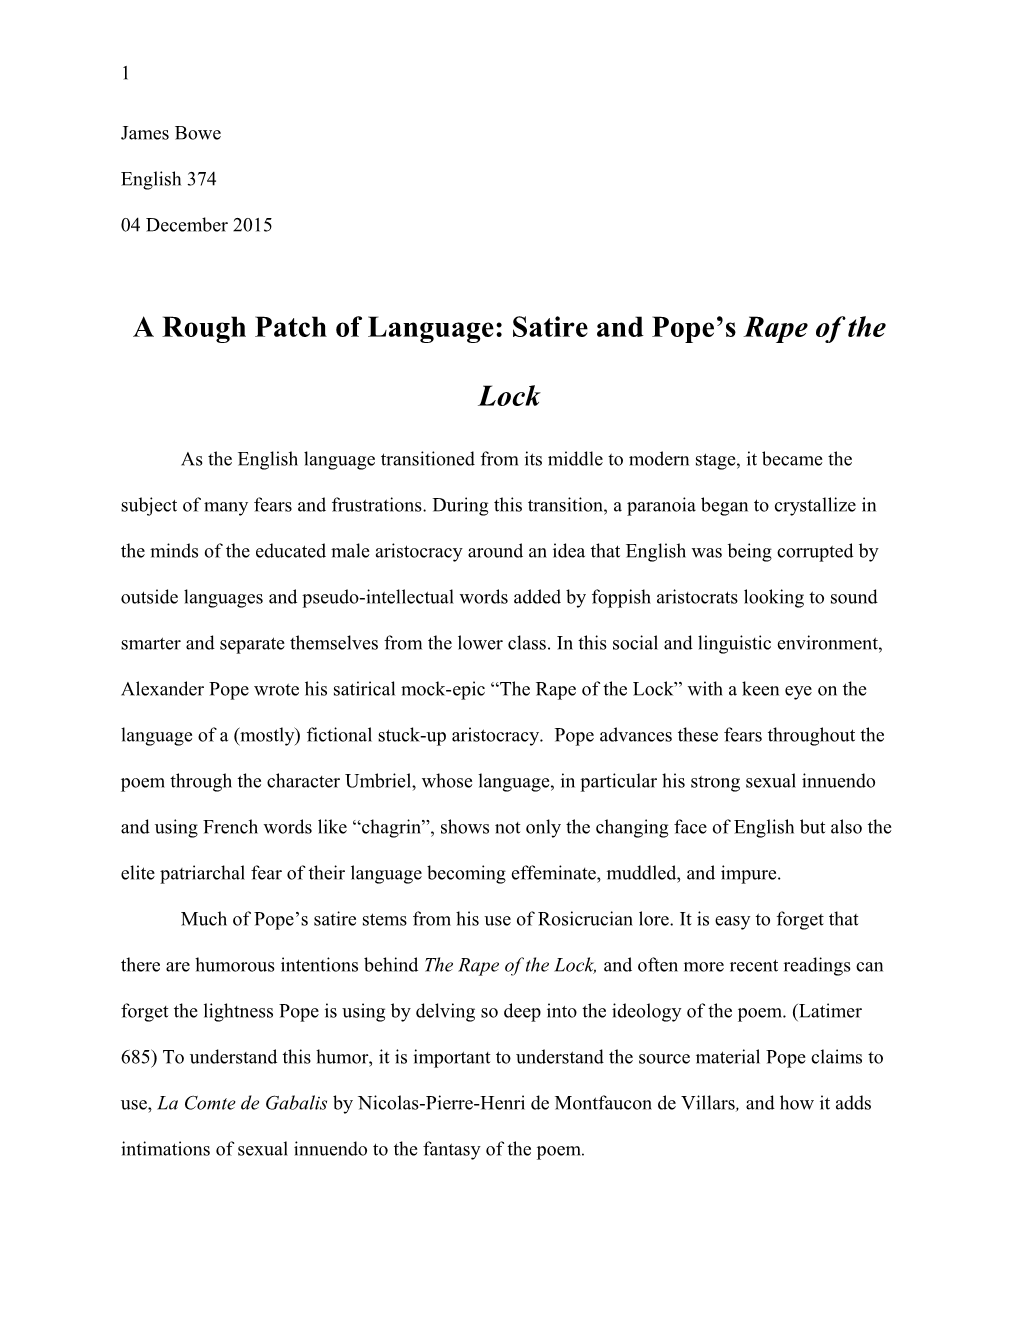 A Rough Patch of Language: Satire and Pope S Rape of the Lock